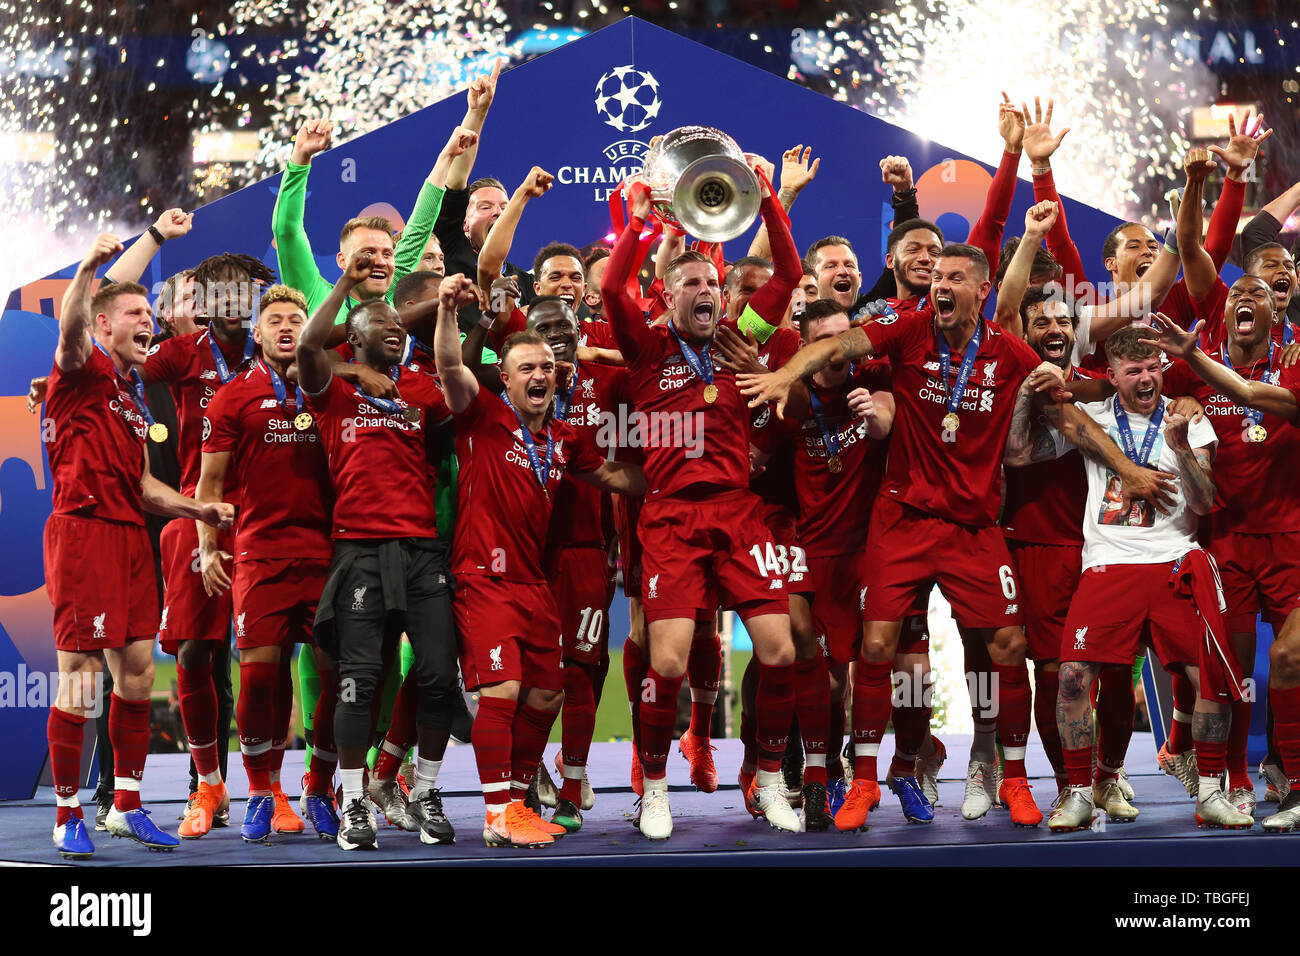 Jordan Henderson of Liverpool lifts the trophy into the air in celebration  after winning the UEFA Champions League - Tottenham Hotspur v Liverpool,  UEFA Champions League Final 2019, Wanda Metropolitano Stadium, Madrid -